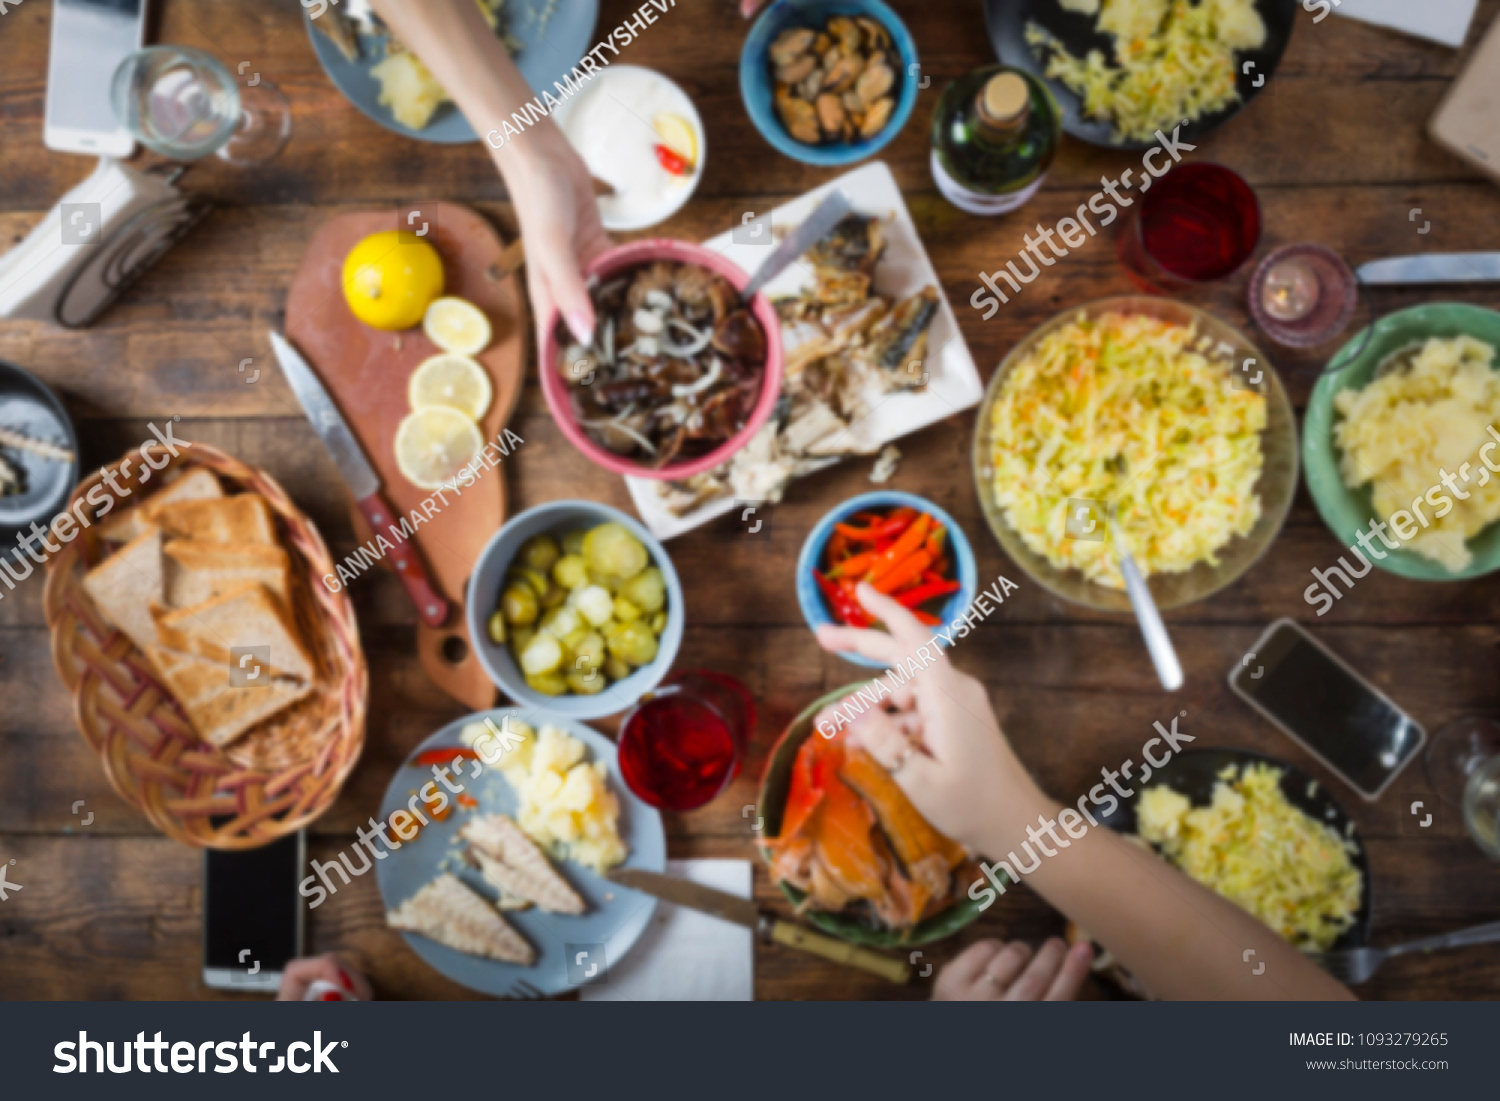 background blur. background blurred image of dinner table with different food. Easter, Christmas, Birthday, Thanksgiving. Joint toast and blow with a glass of salute in honor of the holiday. top view #1093279265